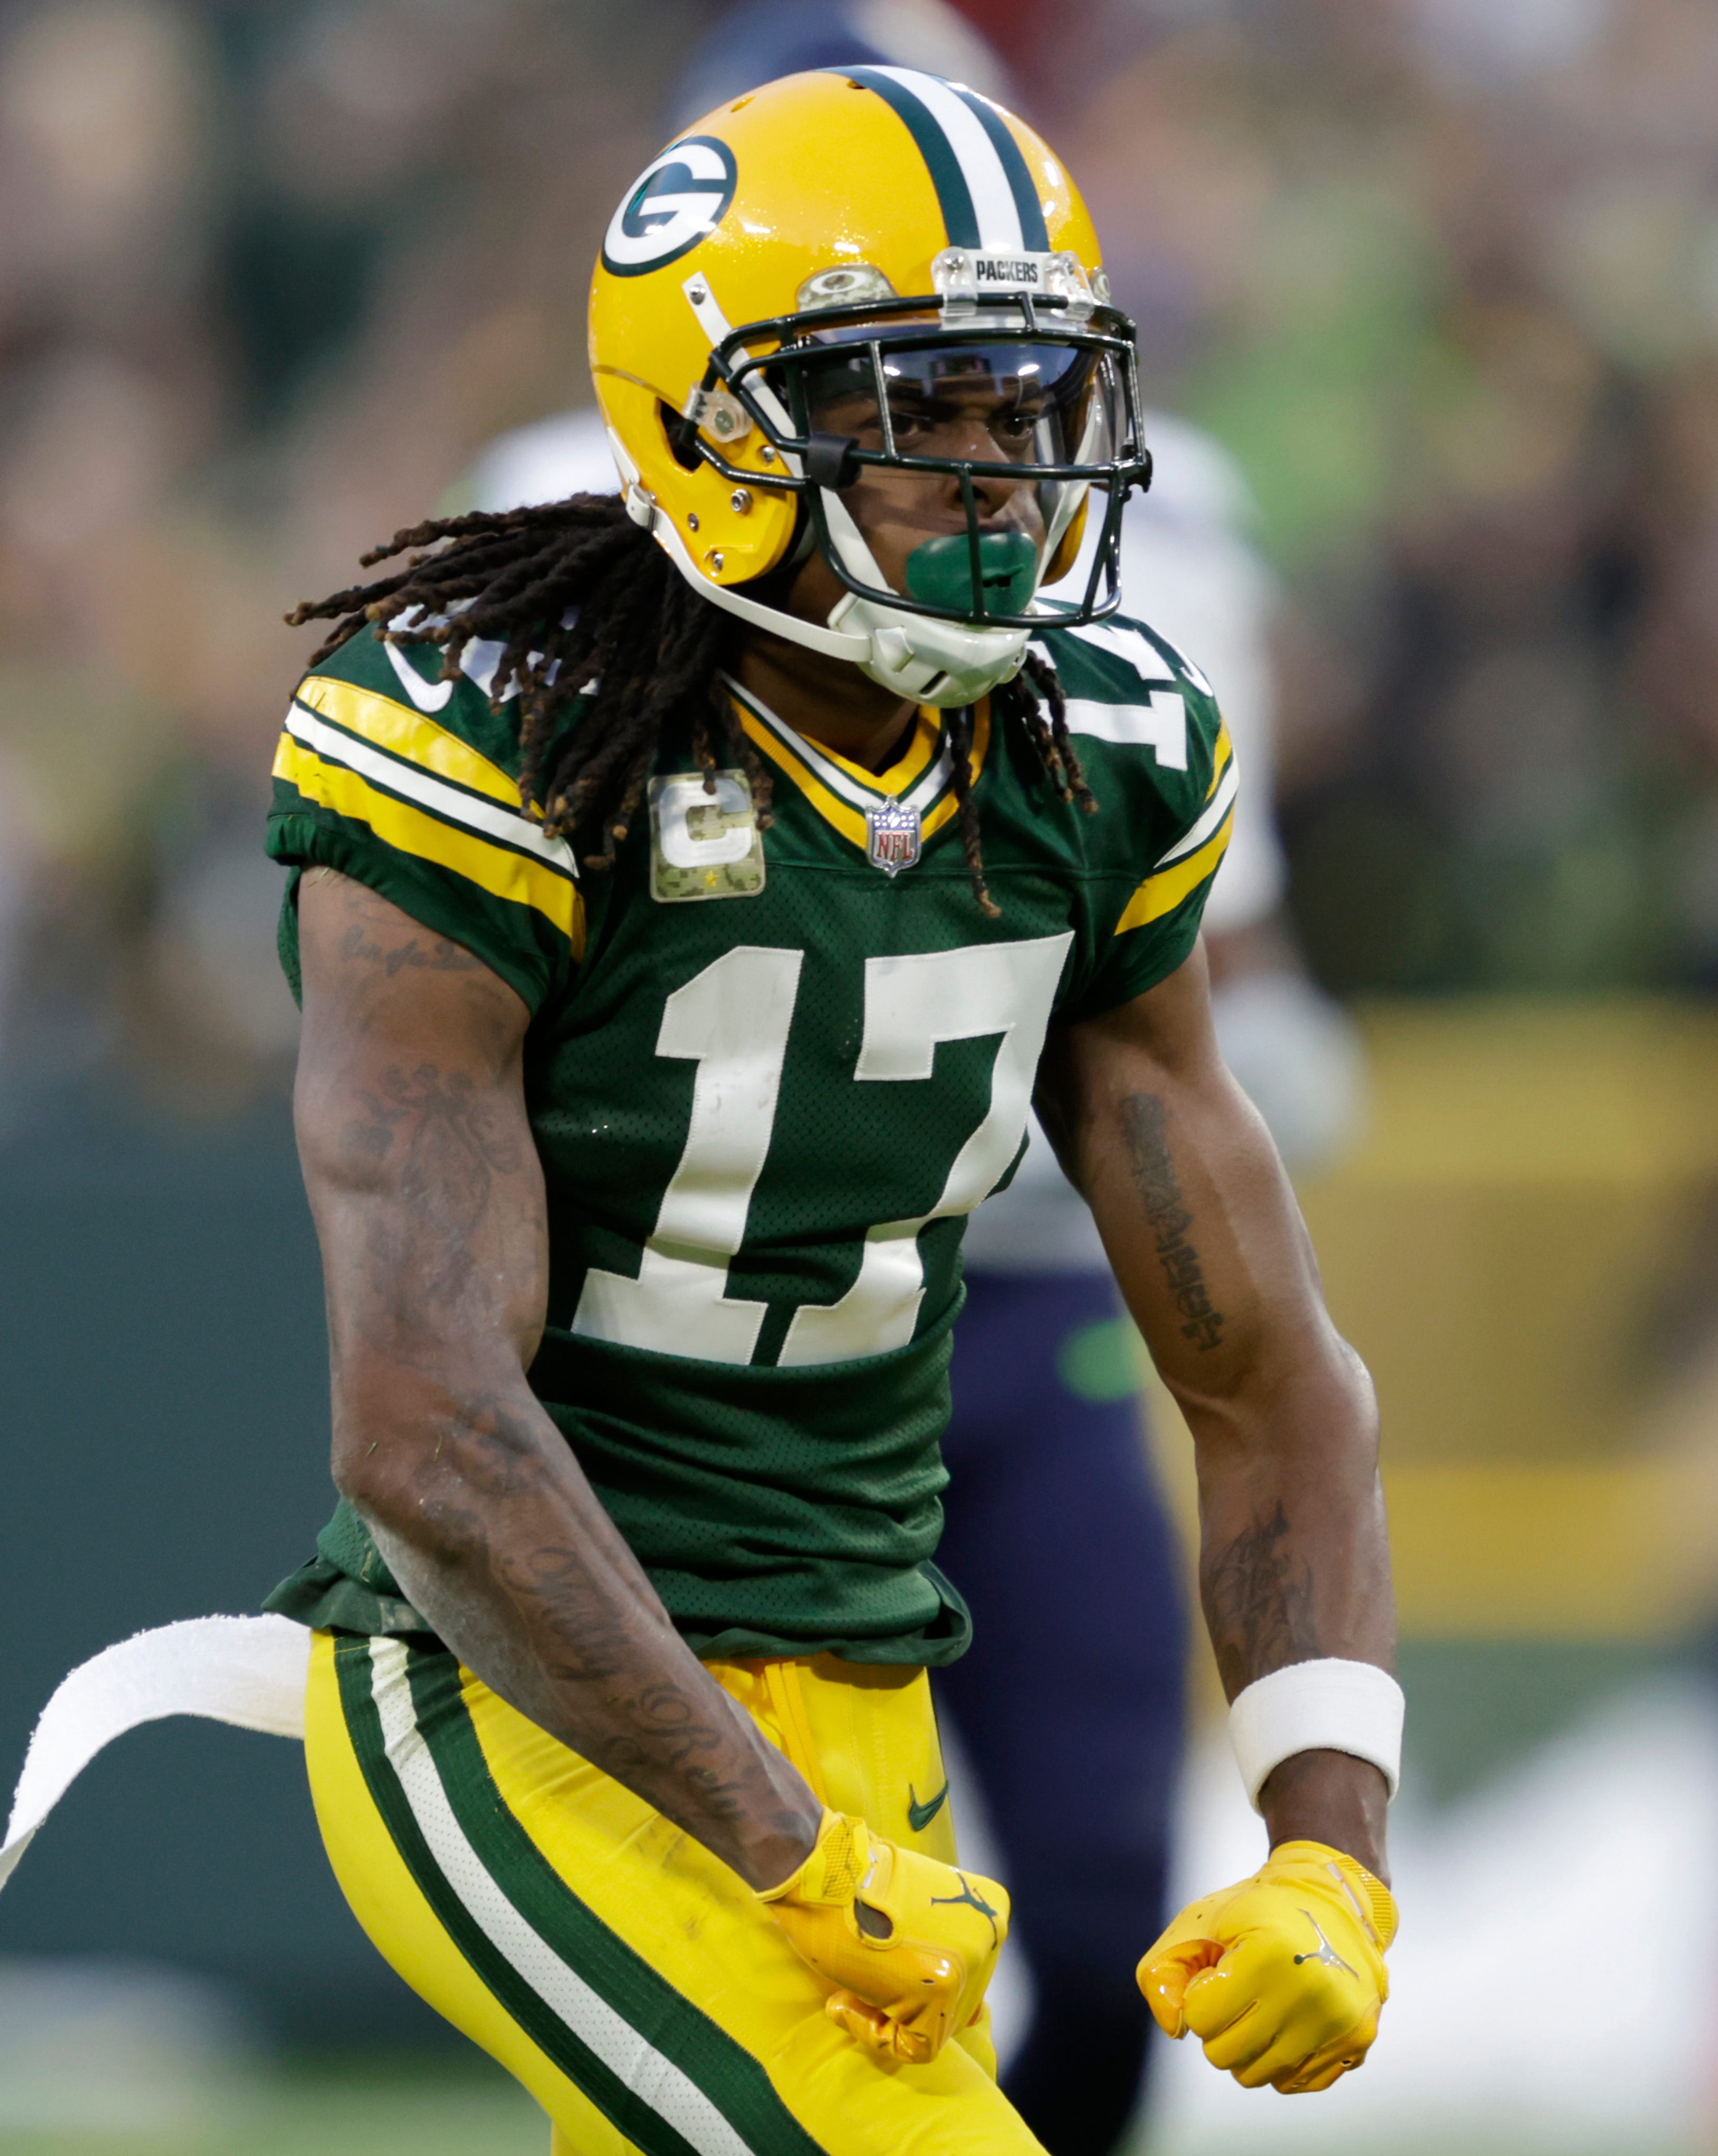 NFL Free Agency News and Rumors: Latest on Green Bay Packers wide receiver  Davante Adams